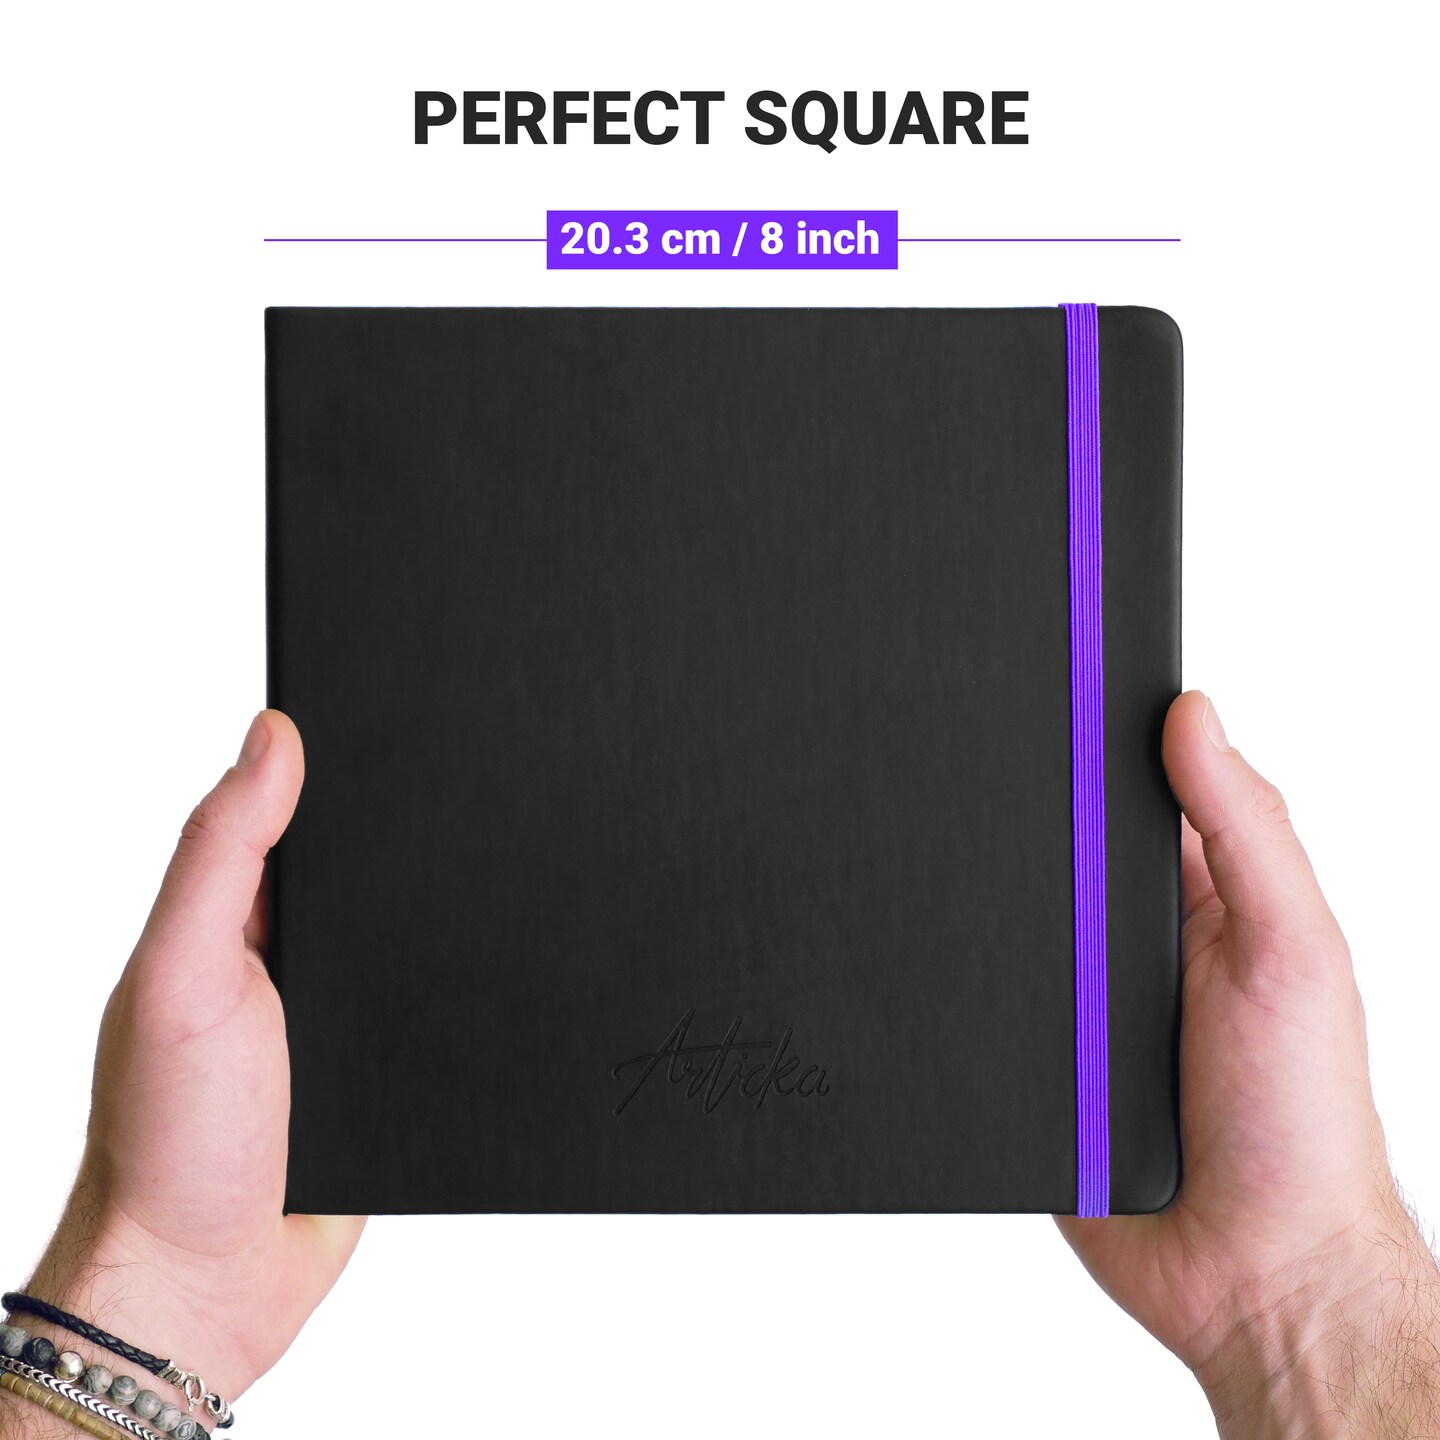 Moinchore Square Sketchbook 8 x 8 Inch Hardcover Art Sketch Book Drawing  Papers 120 Pages, Mixed Media Journal Notebook with Elastic Closure for  Media